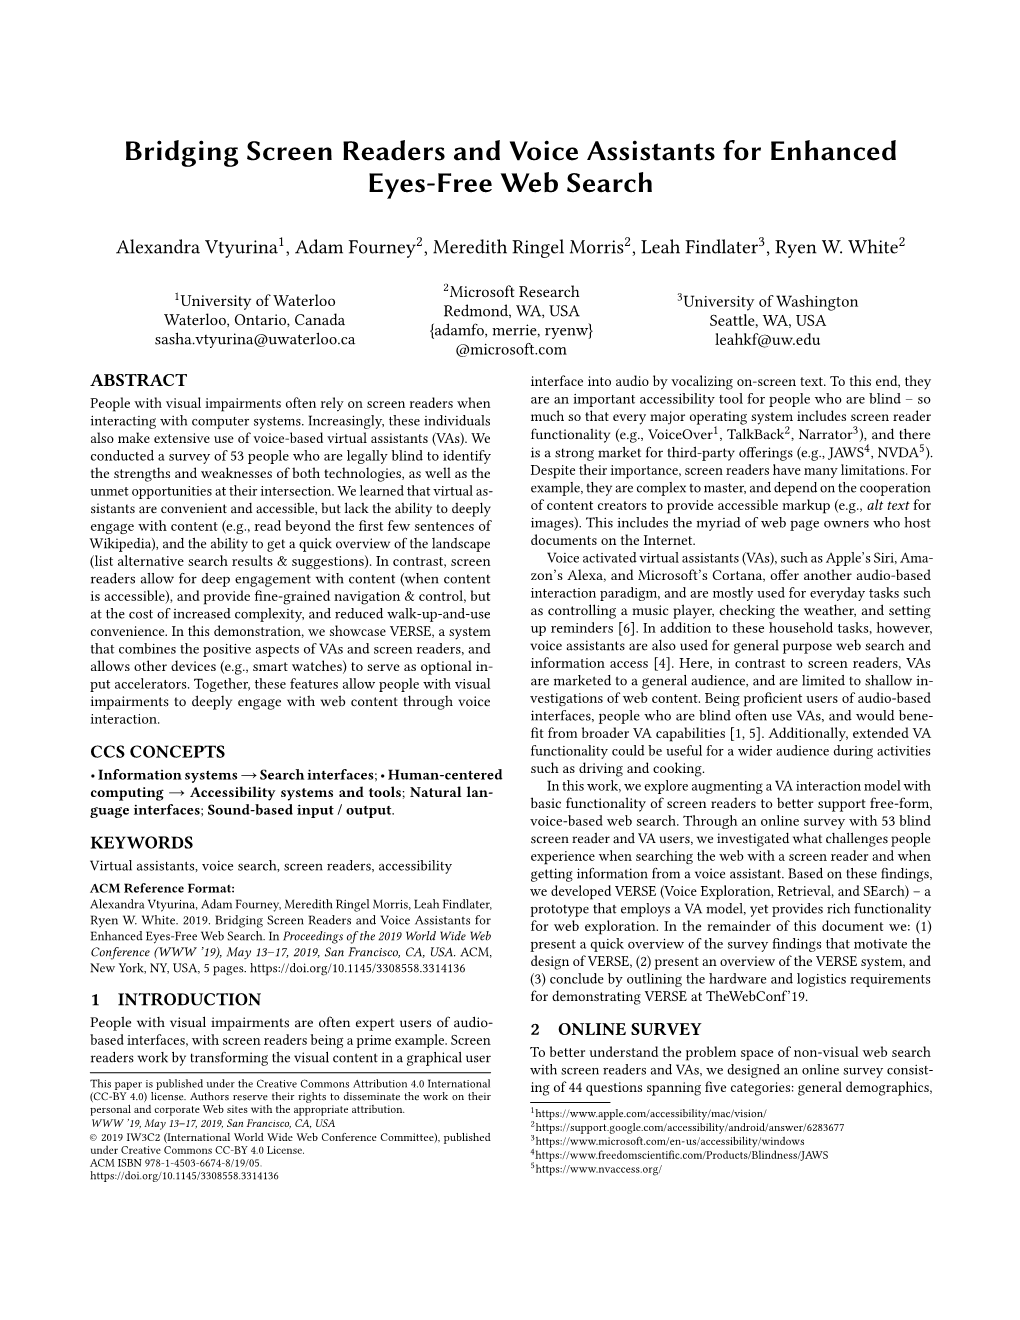 Bridging Screen Readers and Voice Assistants for Enhanced Eyes-Free Web Search